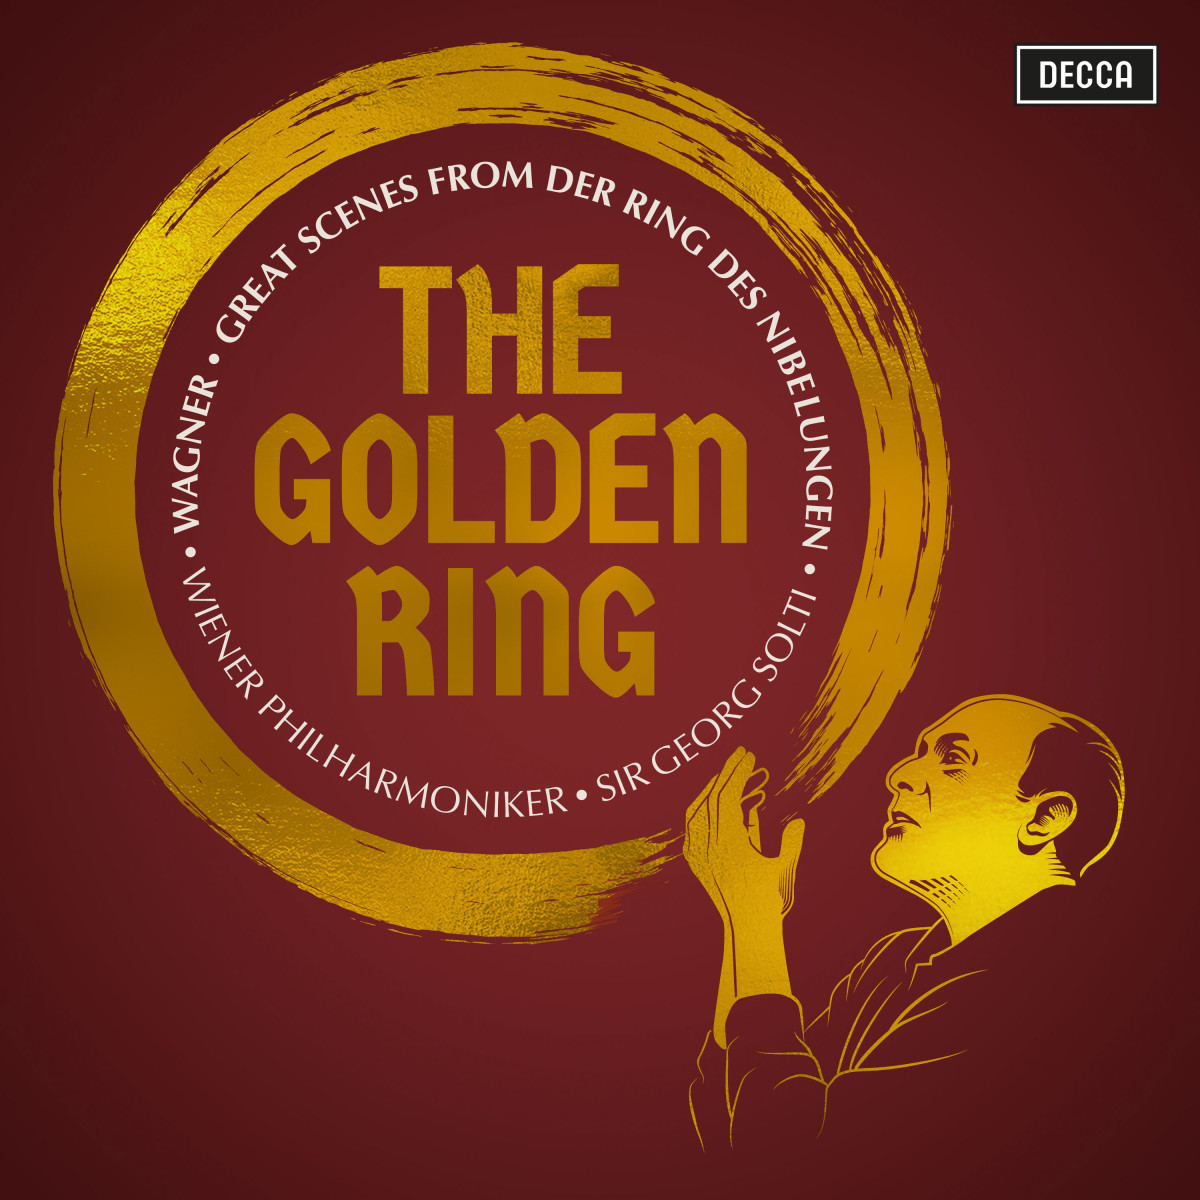 The Golden Ring – great scenes from Wagners Der Ring des Nibelungen